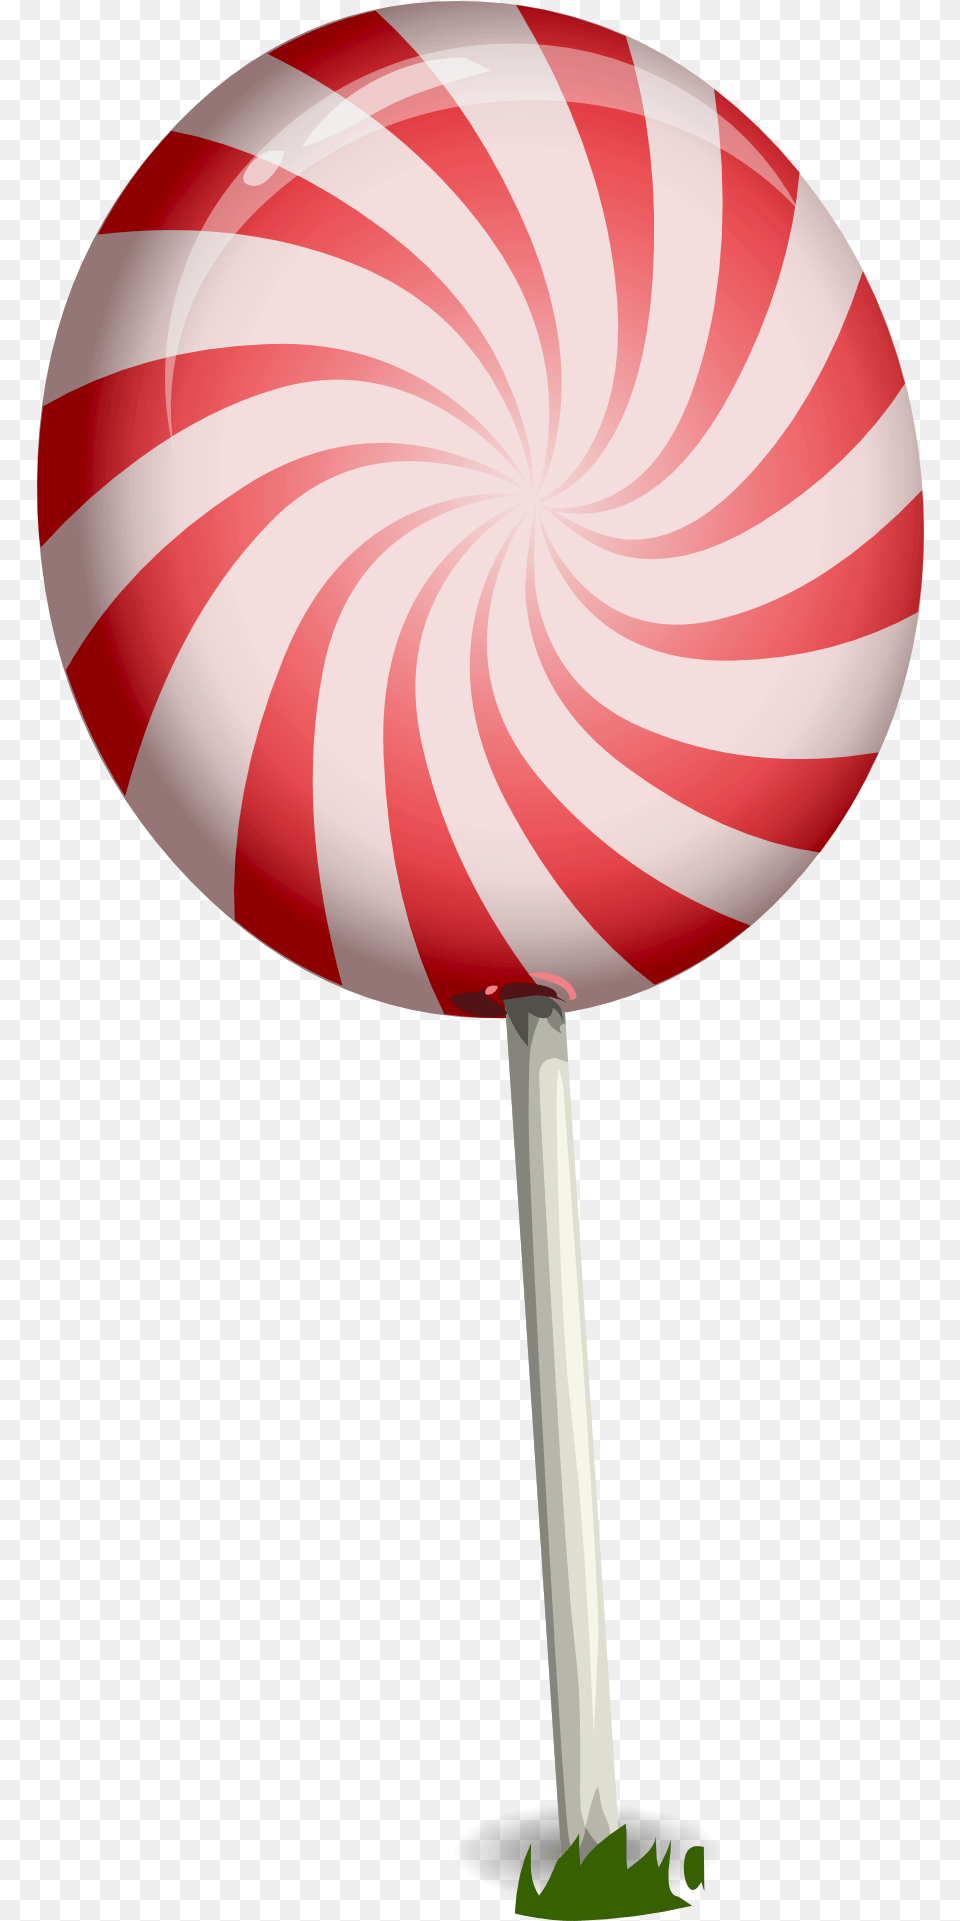 Candy Lollipop Transparent Image Candy, Food, Sweets Png